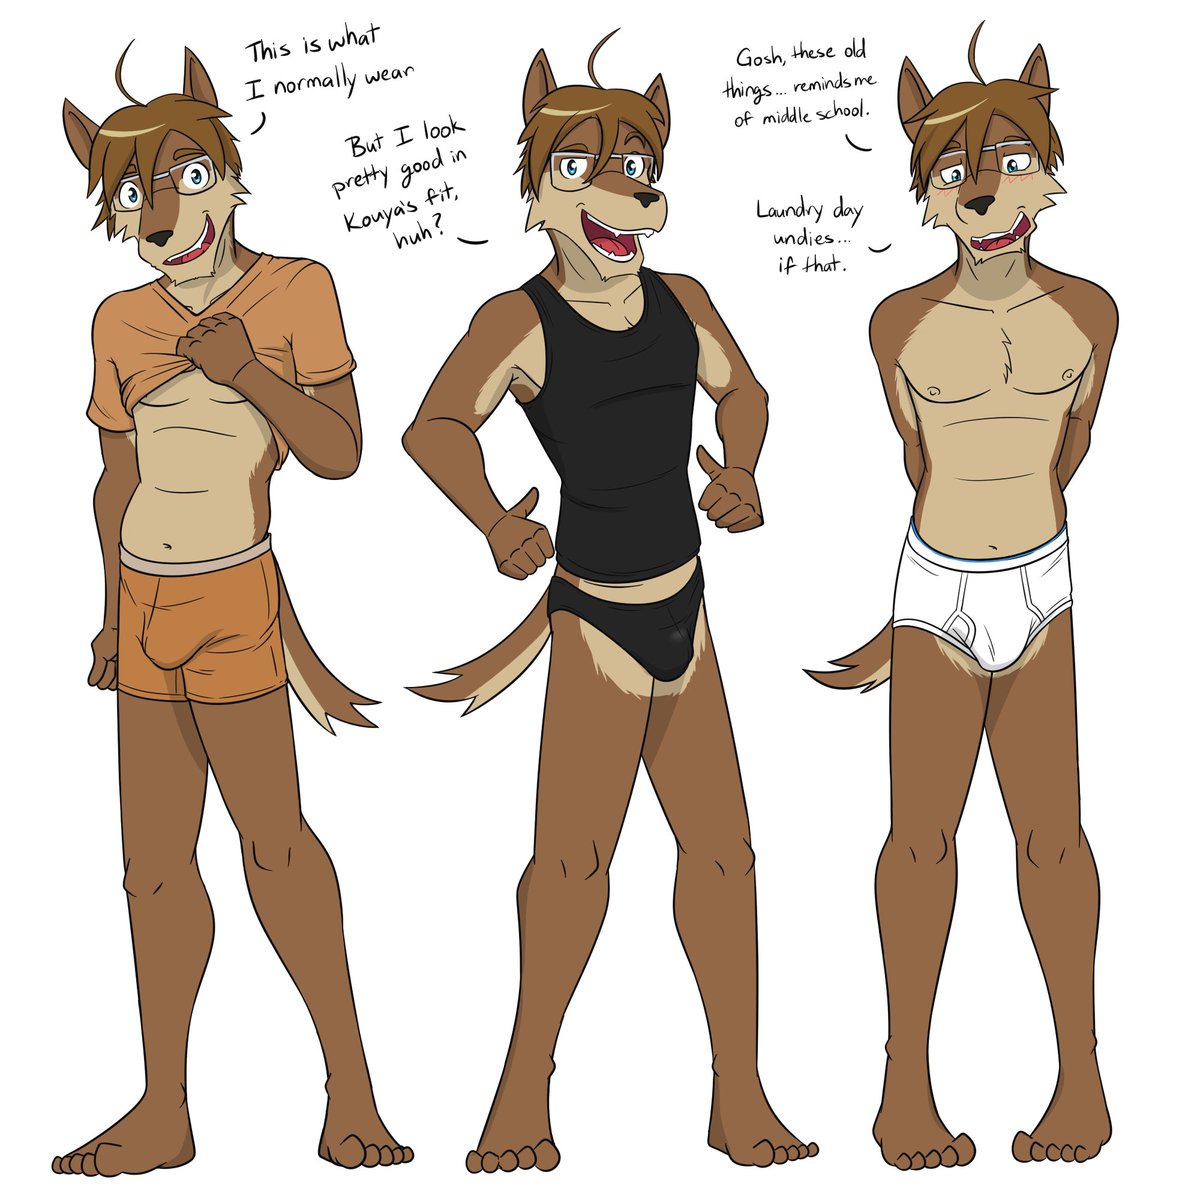 Someone asked what kind of undies Shun wears, so I did a variety. The new updated stuff, to his original, and a fun outfit swap.